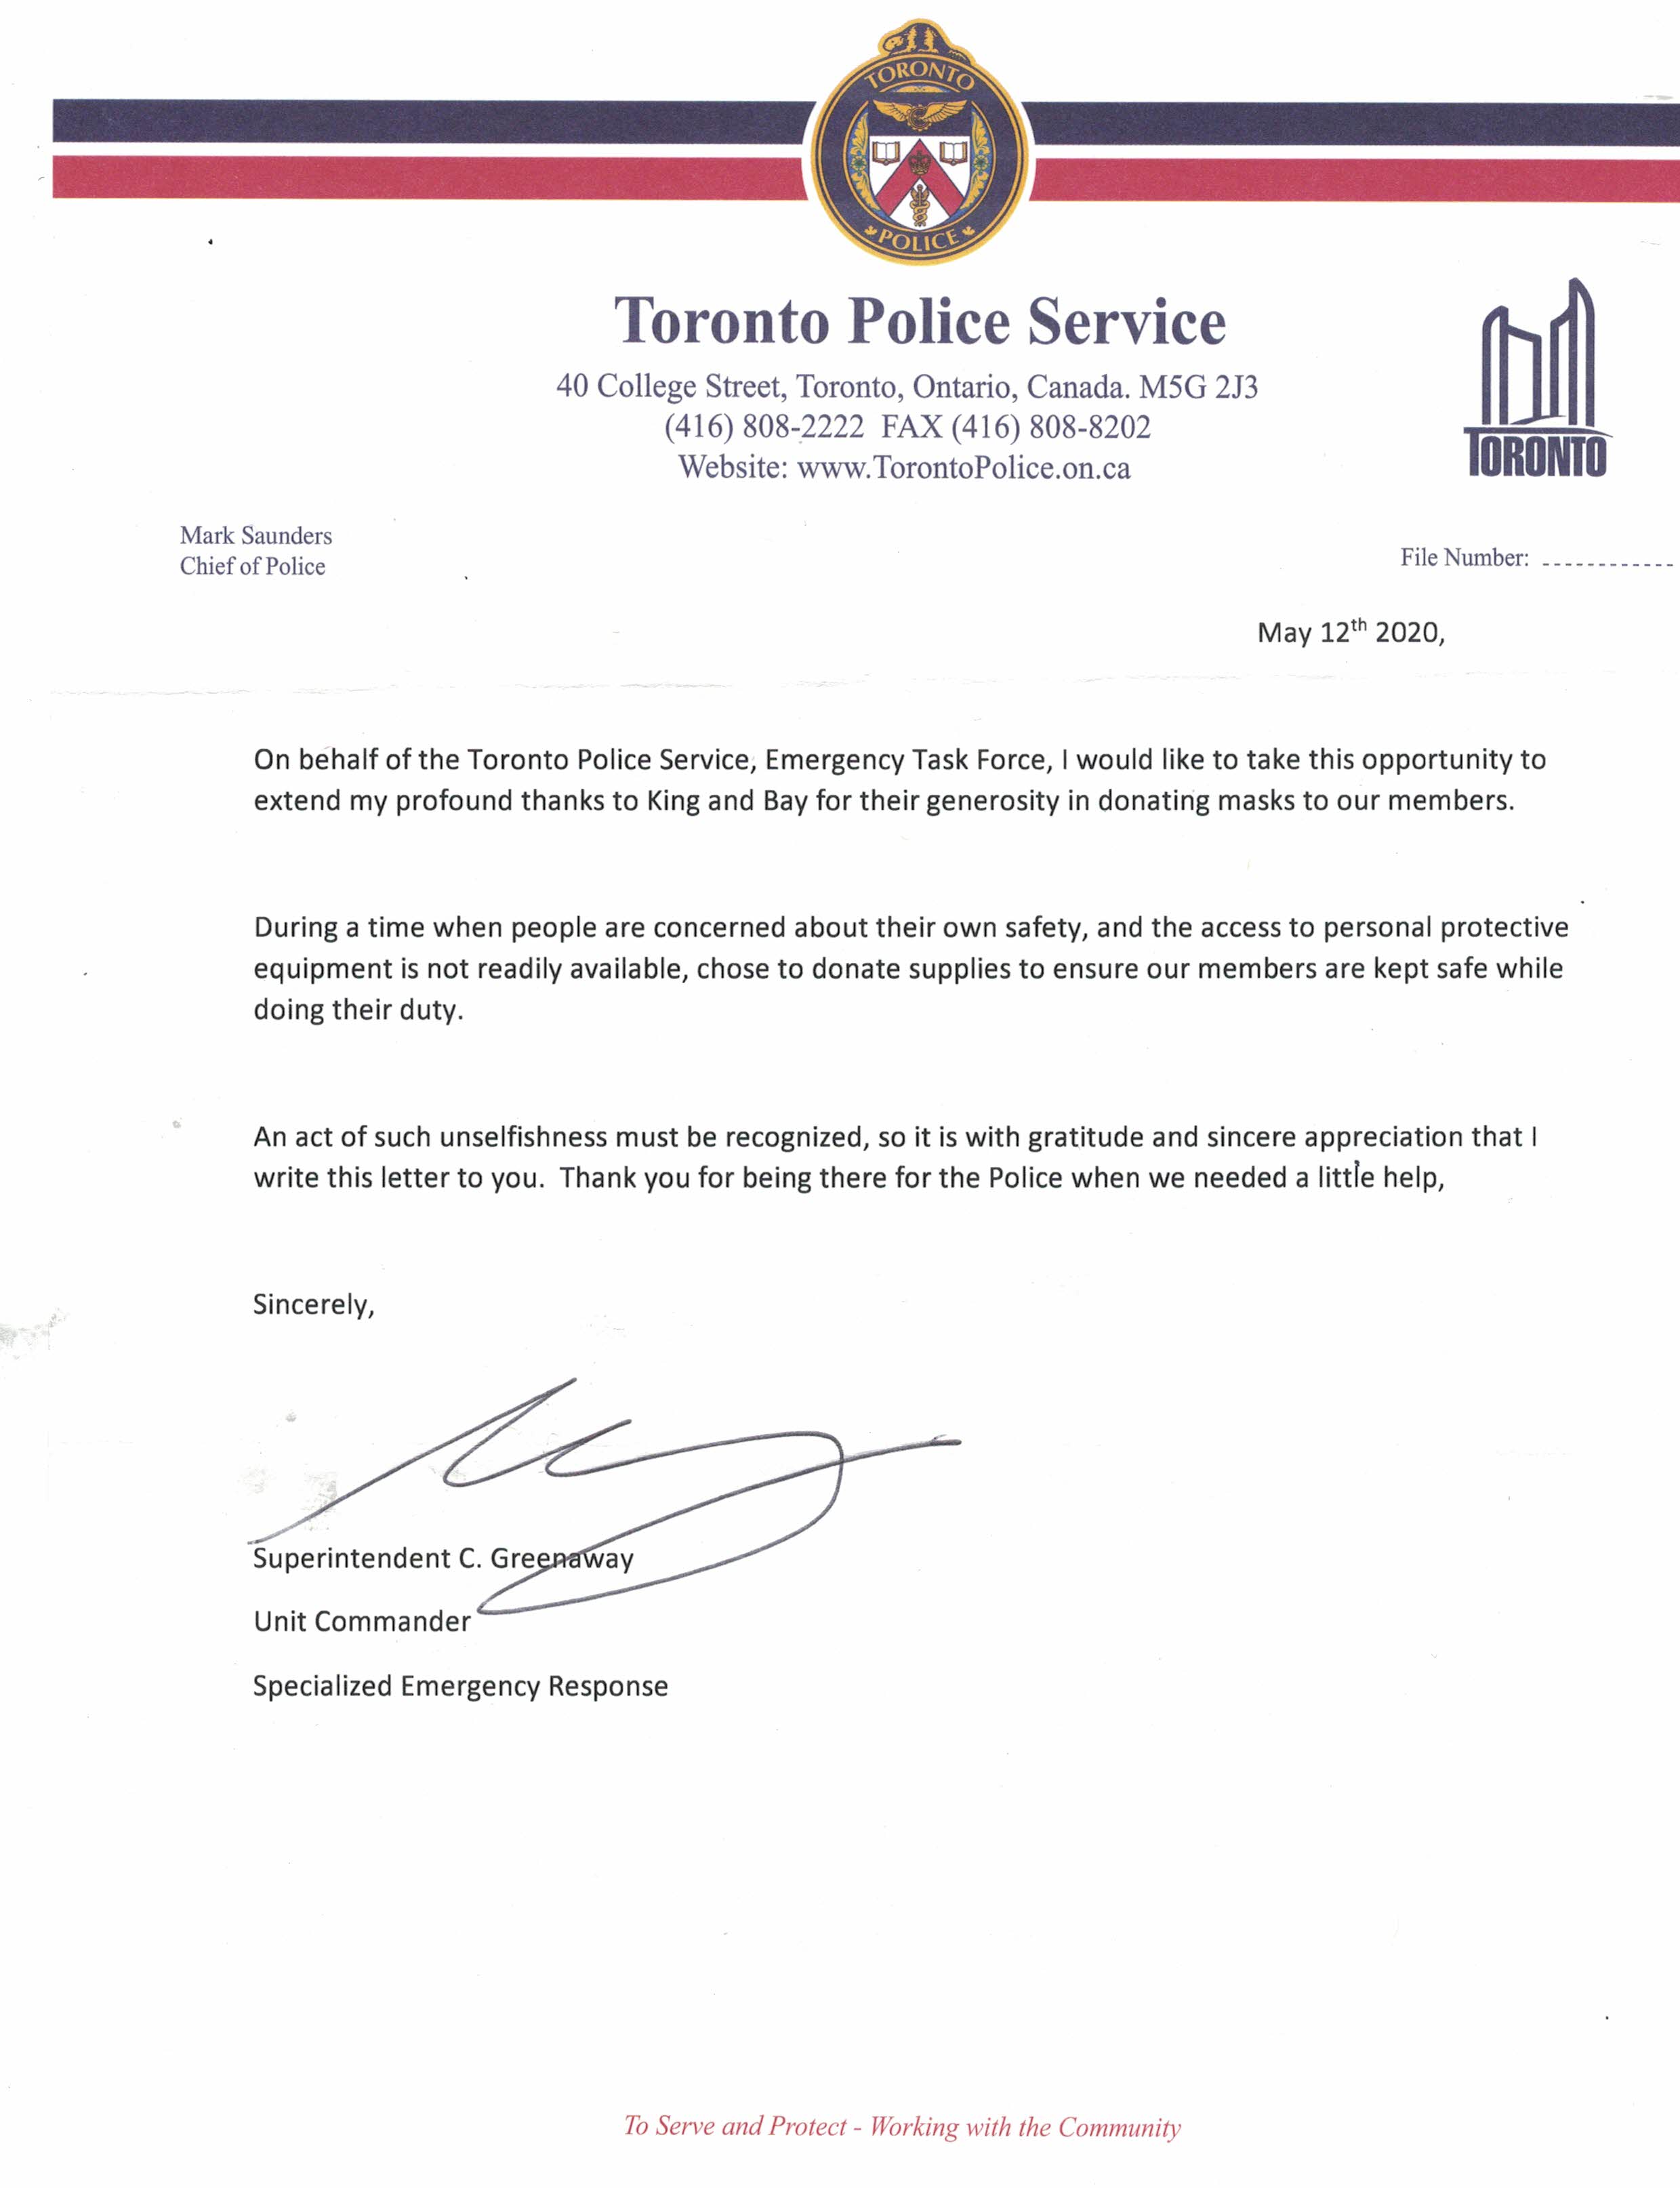 King & Bay receives recognition from the Toronto Police Force's Emergency Task Force for Mission2Mask Initiative